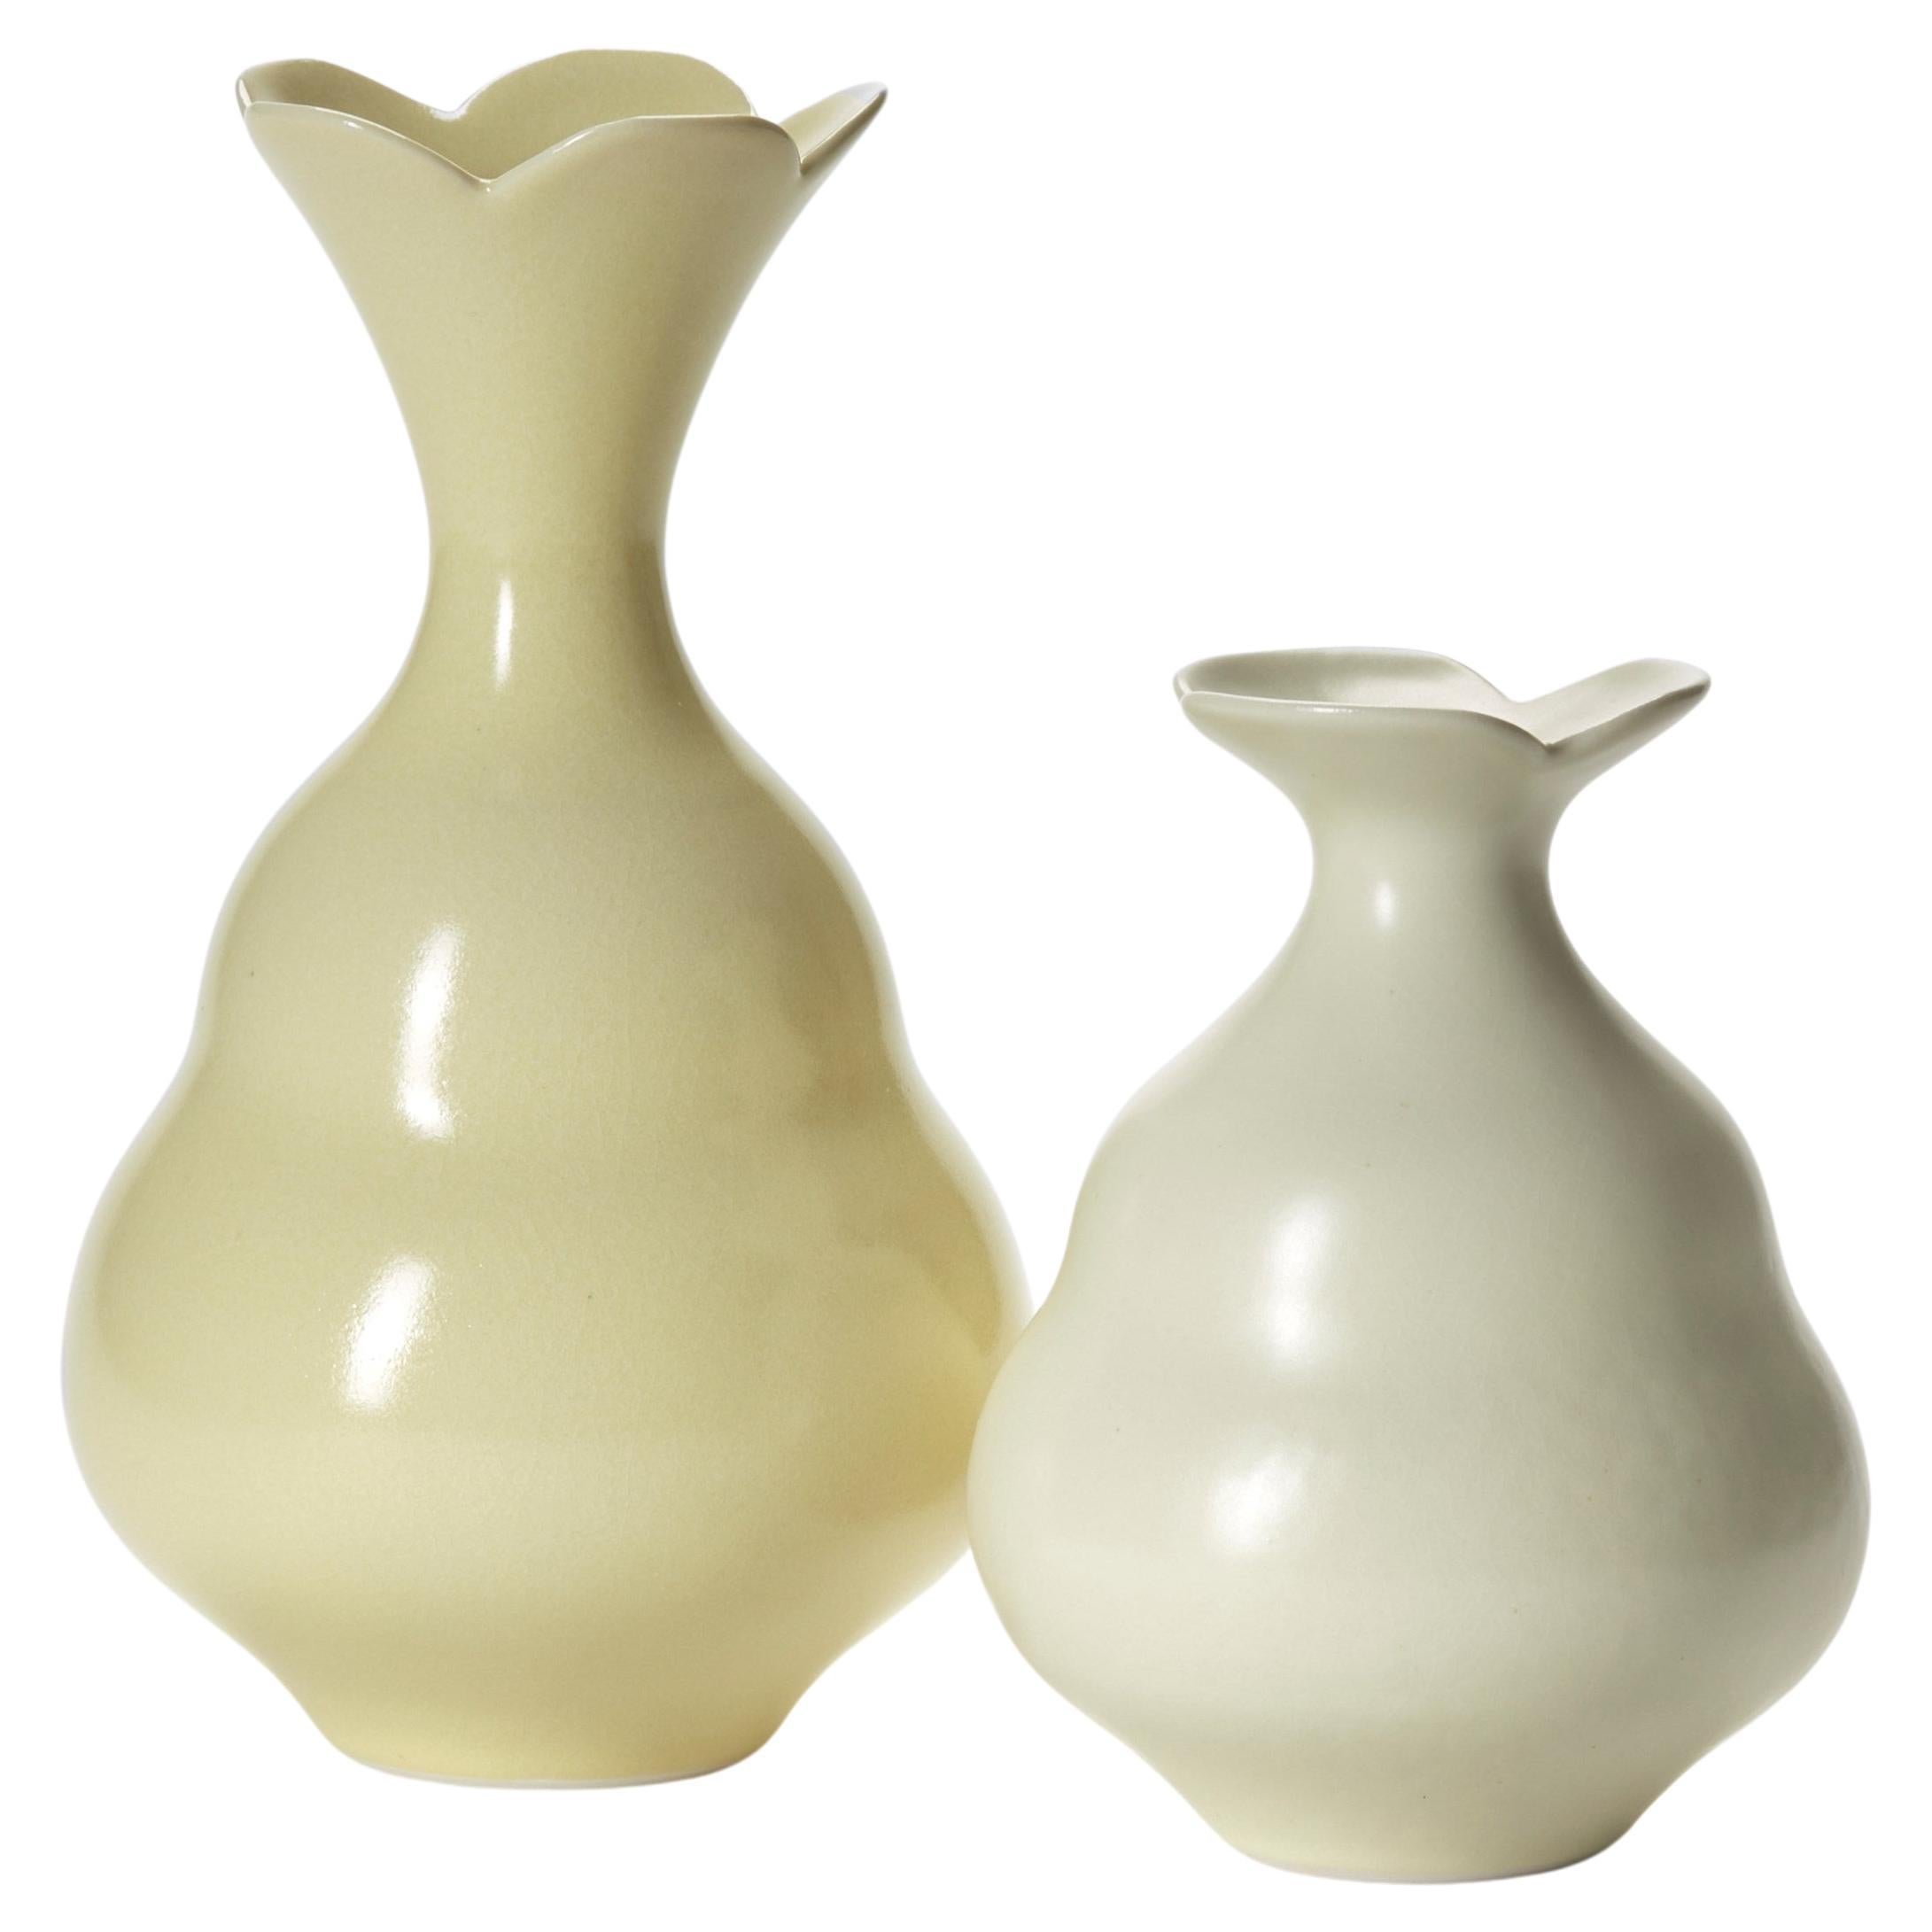 Yellow Duo, pastel yellow pair of hand thrown porcelain vases by Vivienne Foley